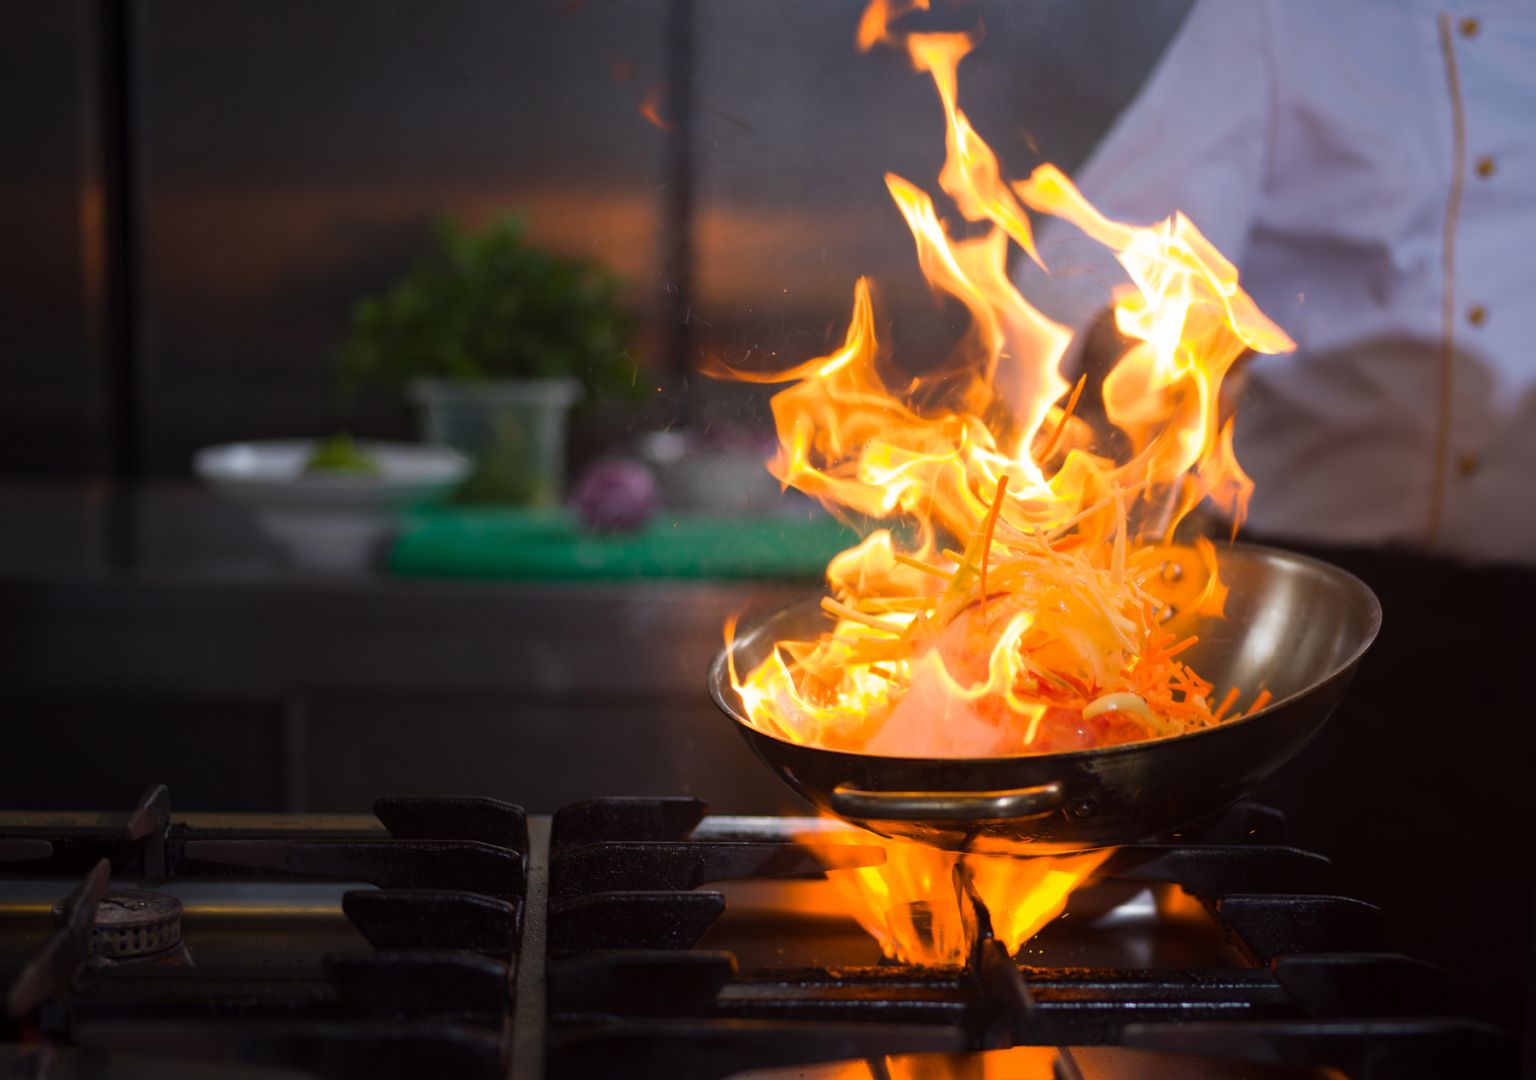 Fire prevention for ventilation equipment for kitchens